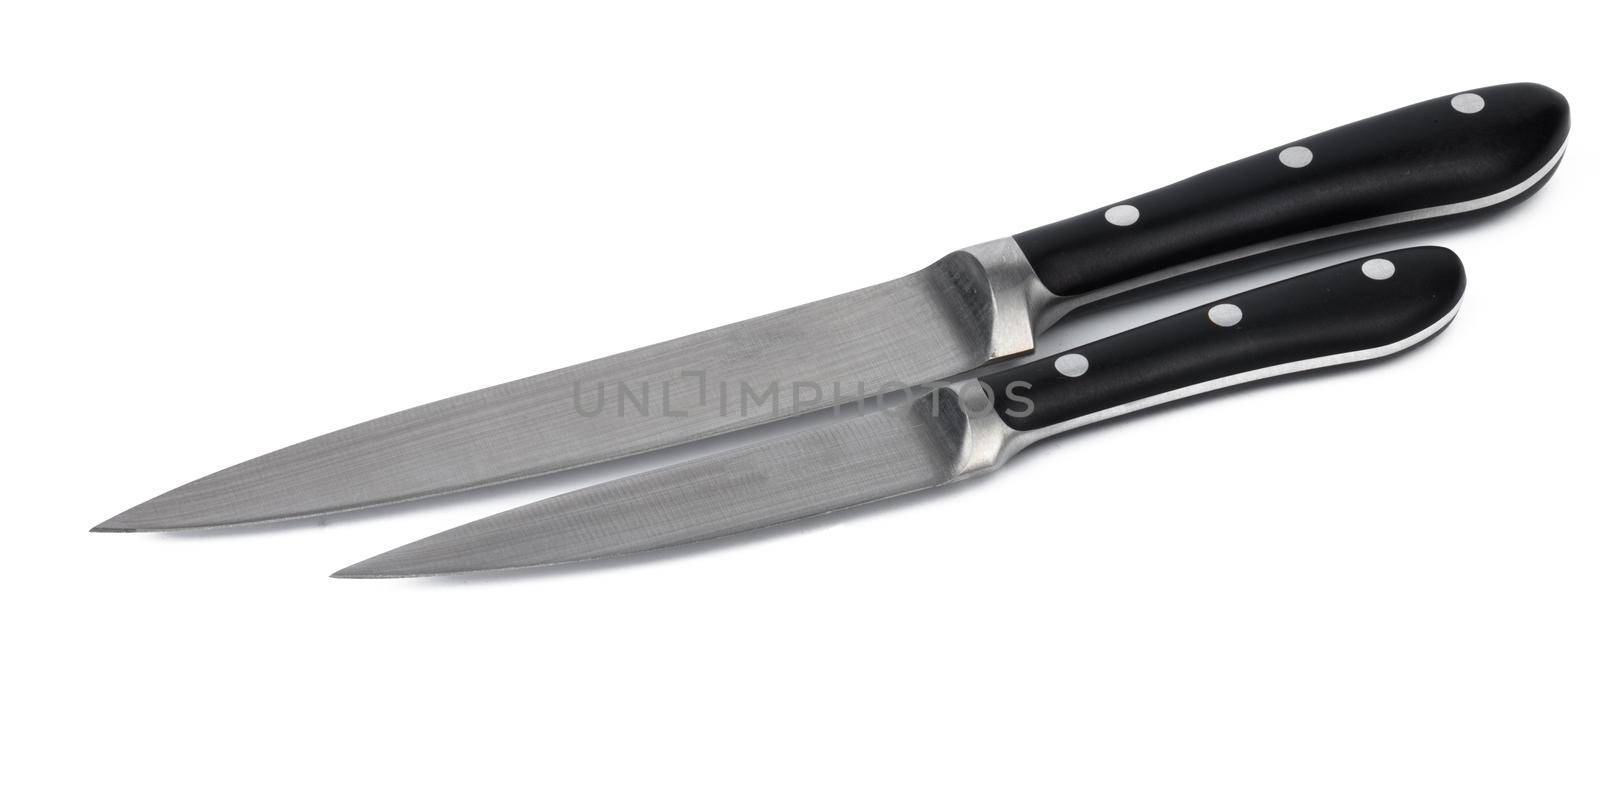 New sharp metal knife on white background close up